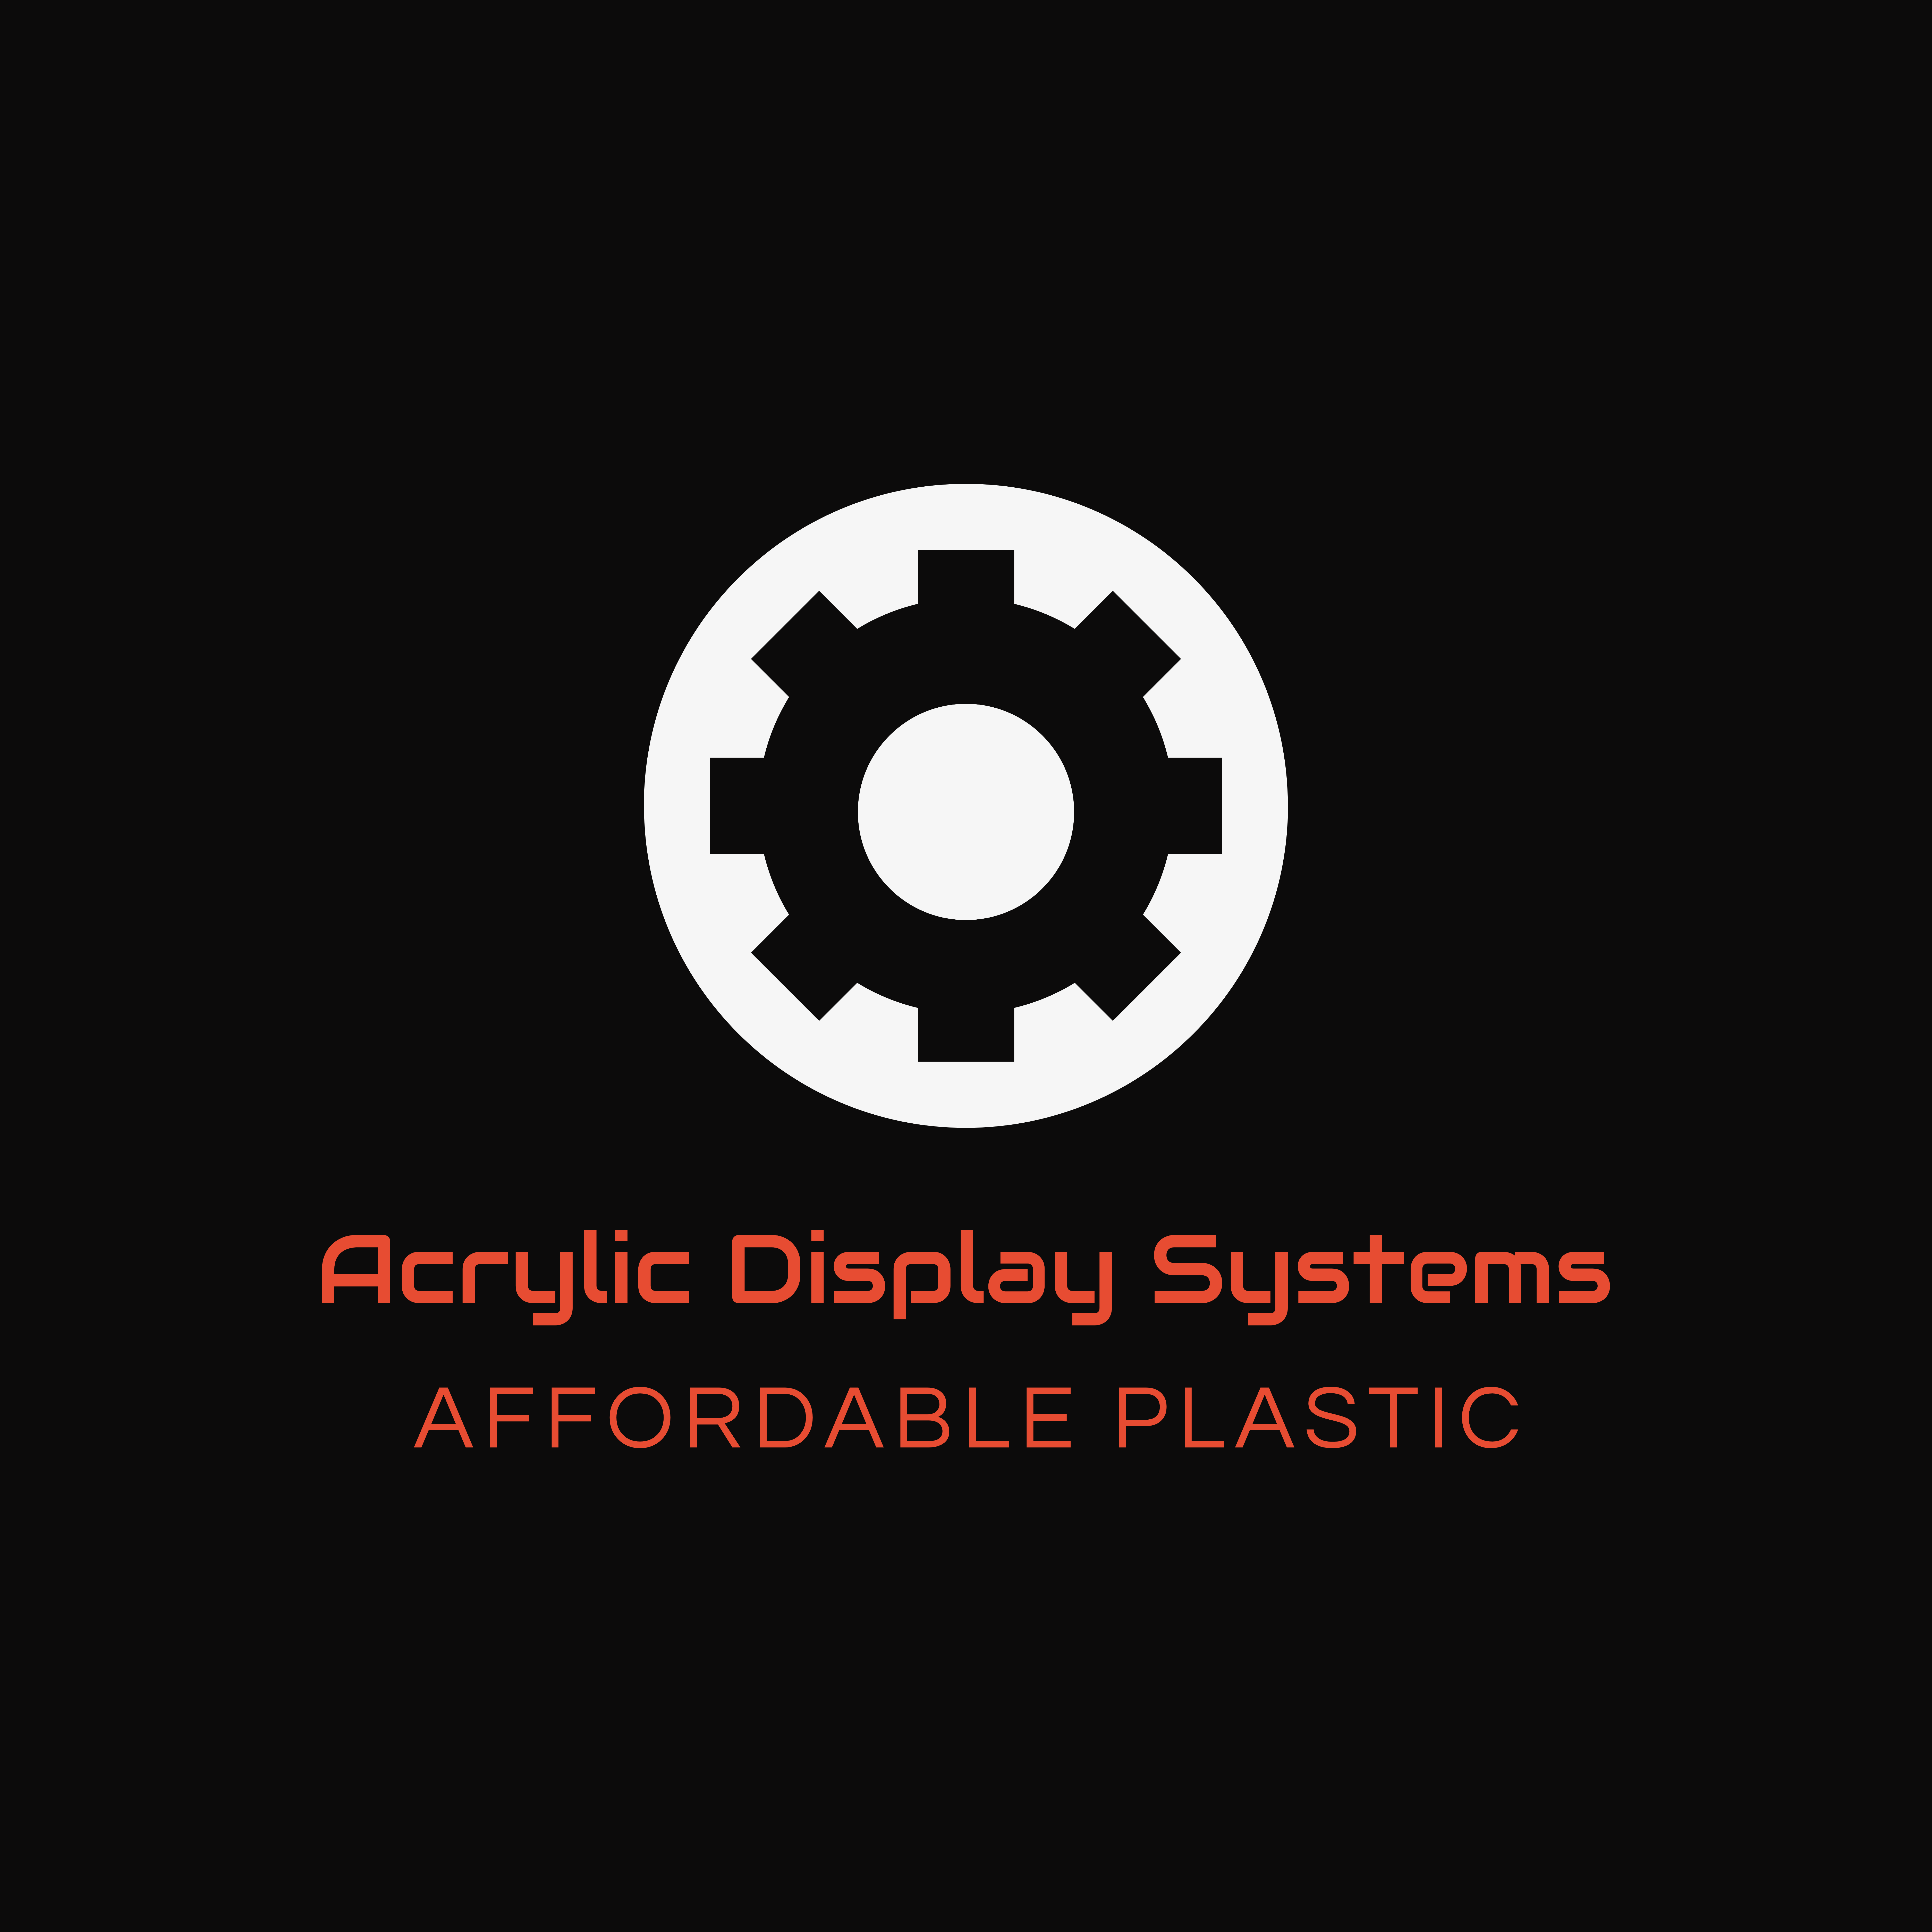 Acrylic Display Systems logo black square with red text and white gear shape